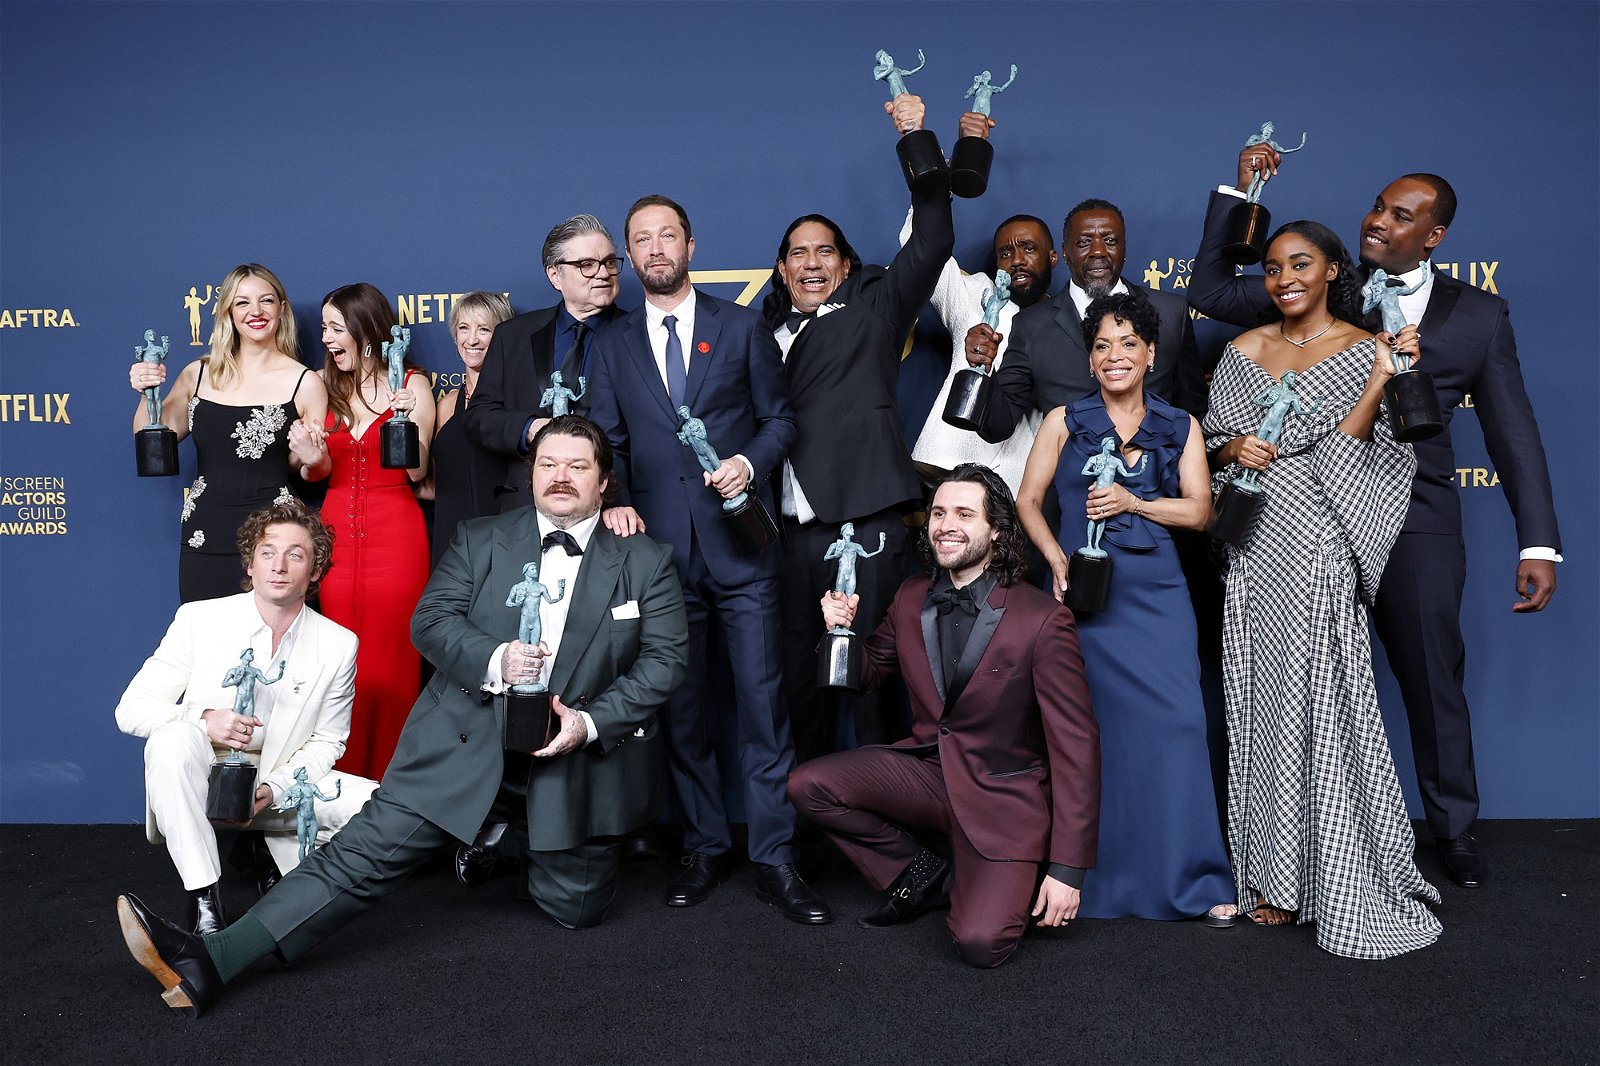 The cast of The Bear with their awards